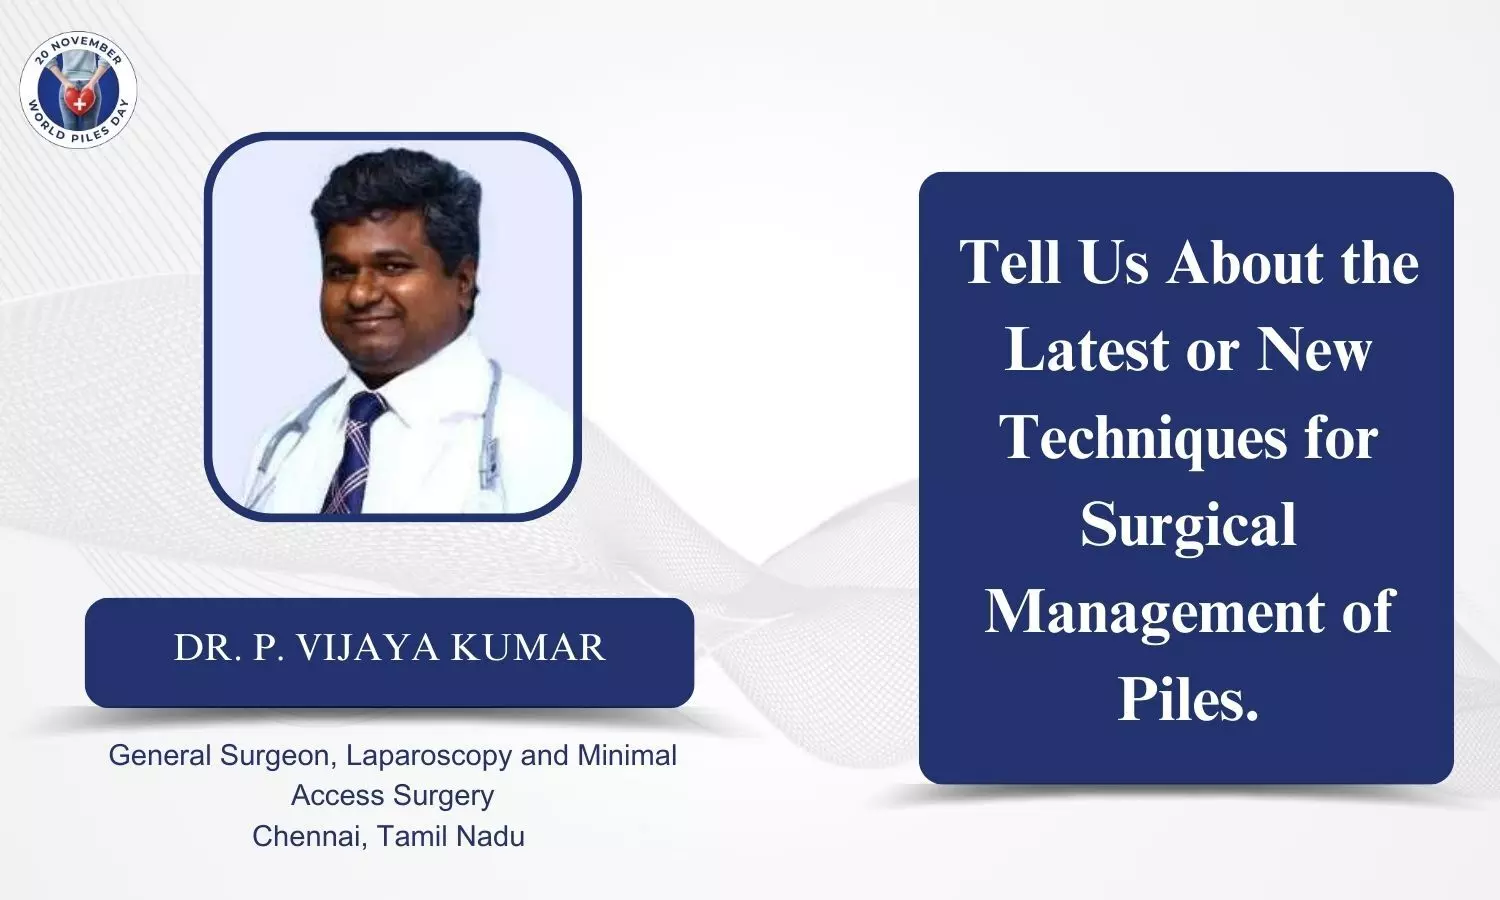 What are the latest techniques for surgical management of piles? - Dr P. Vijaya Kumar